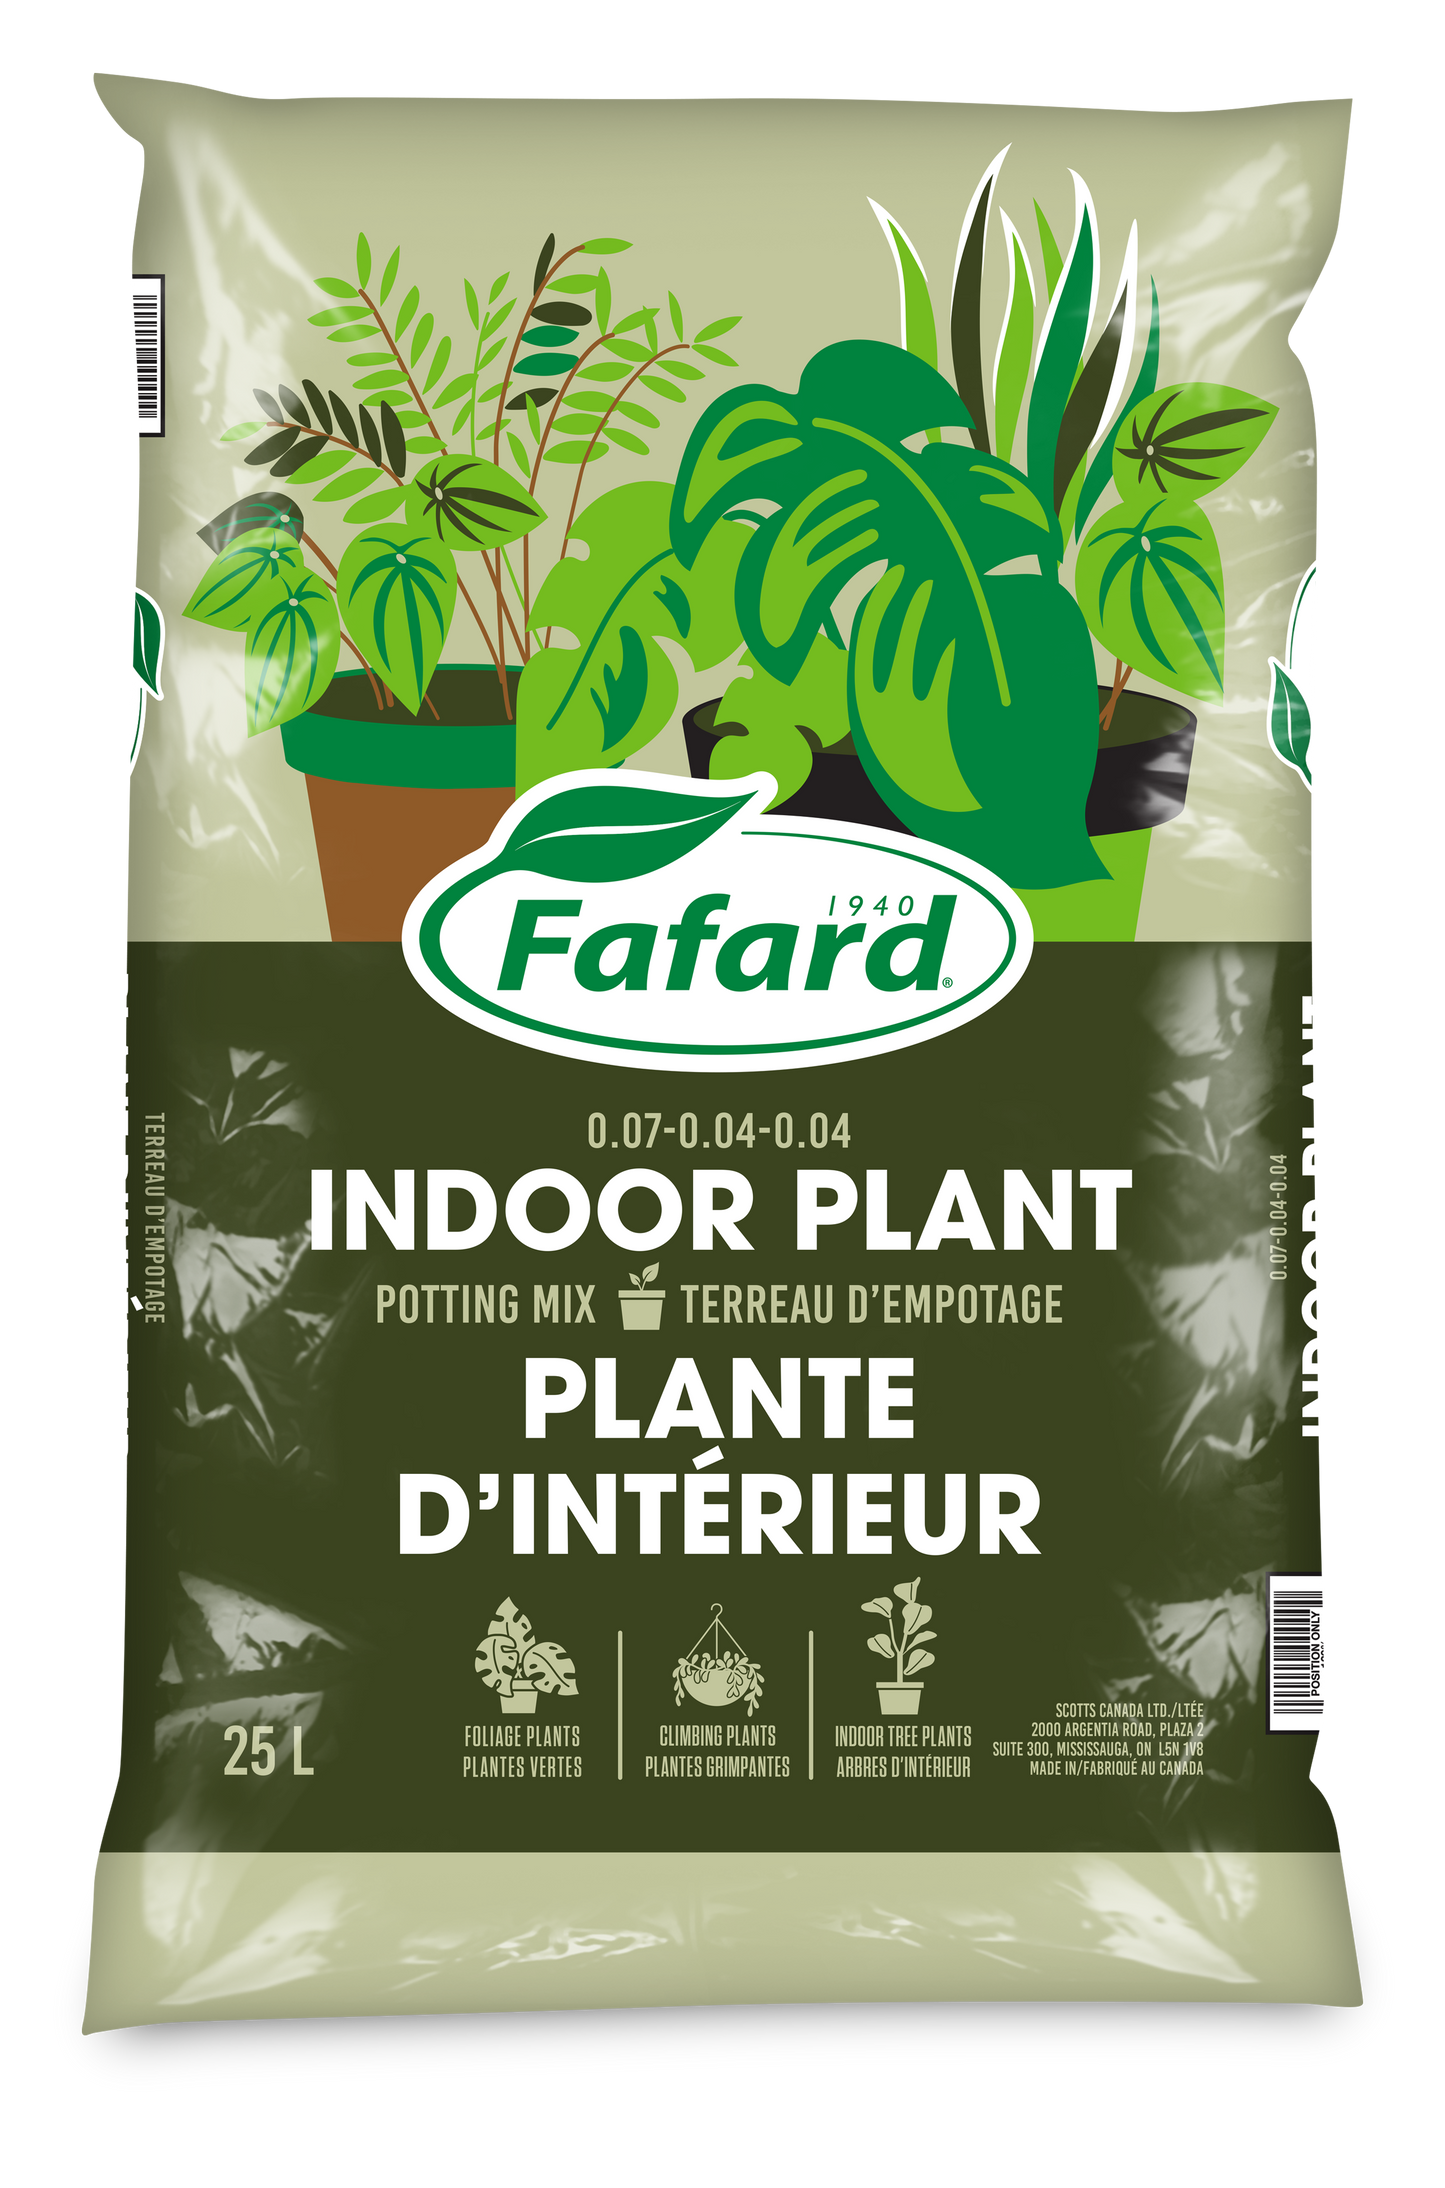 Indoor plant and tropical potting mix